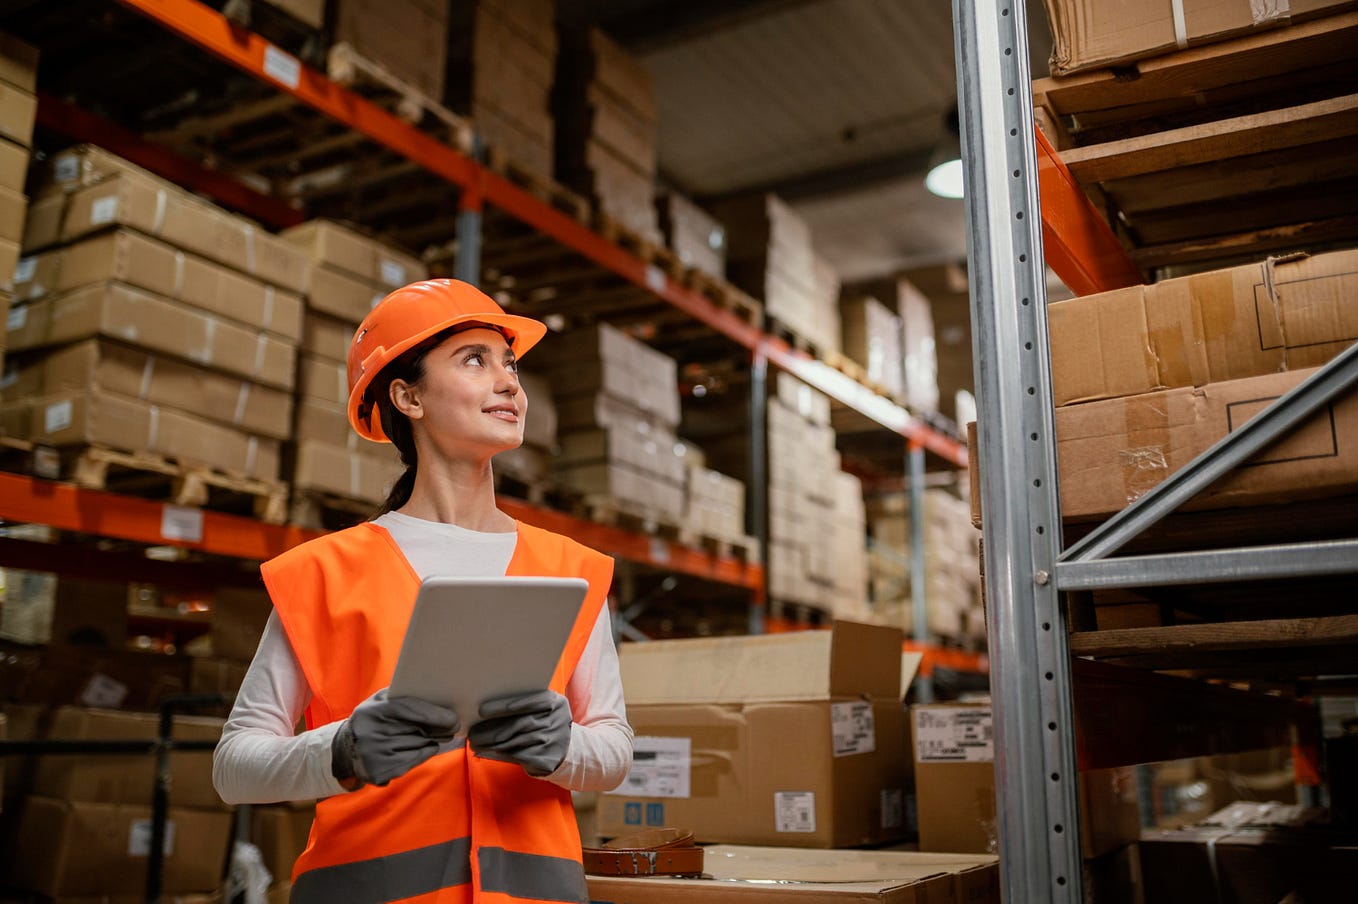 What is ABC Analysis? How is it helping inventory management?